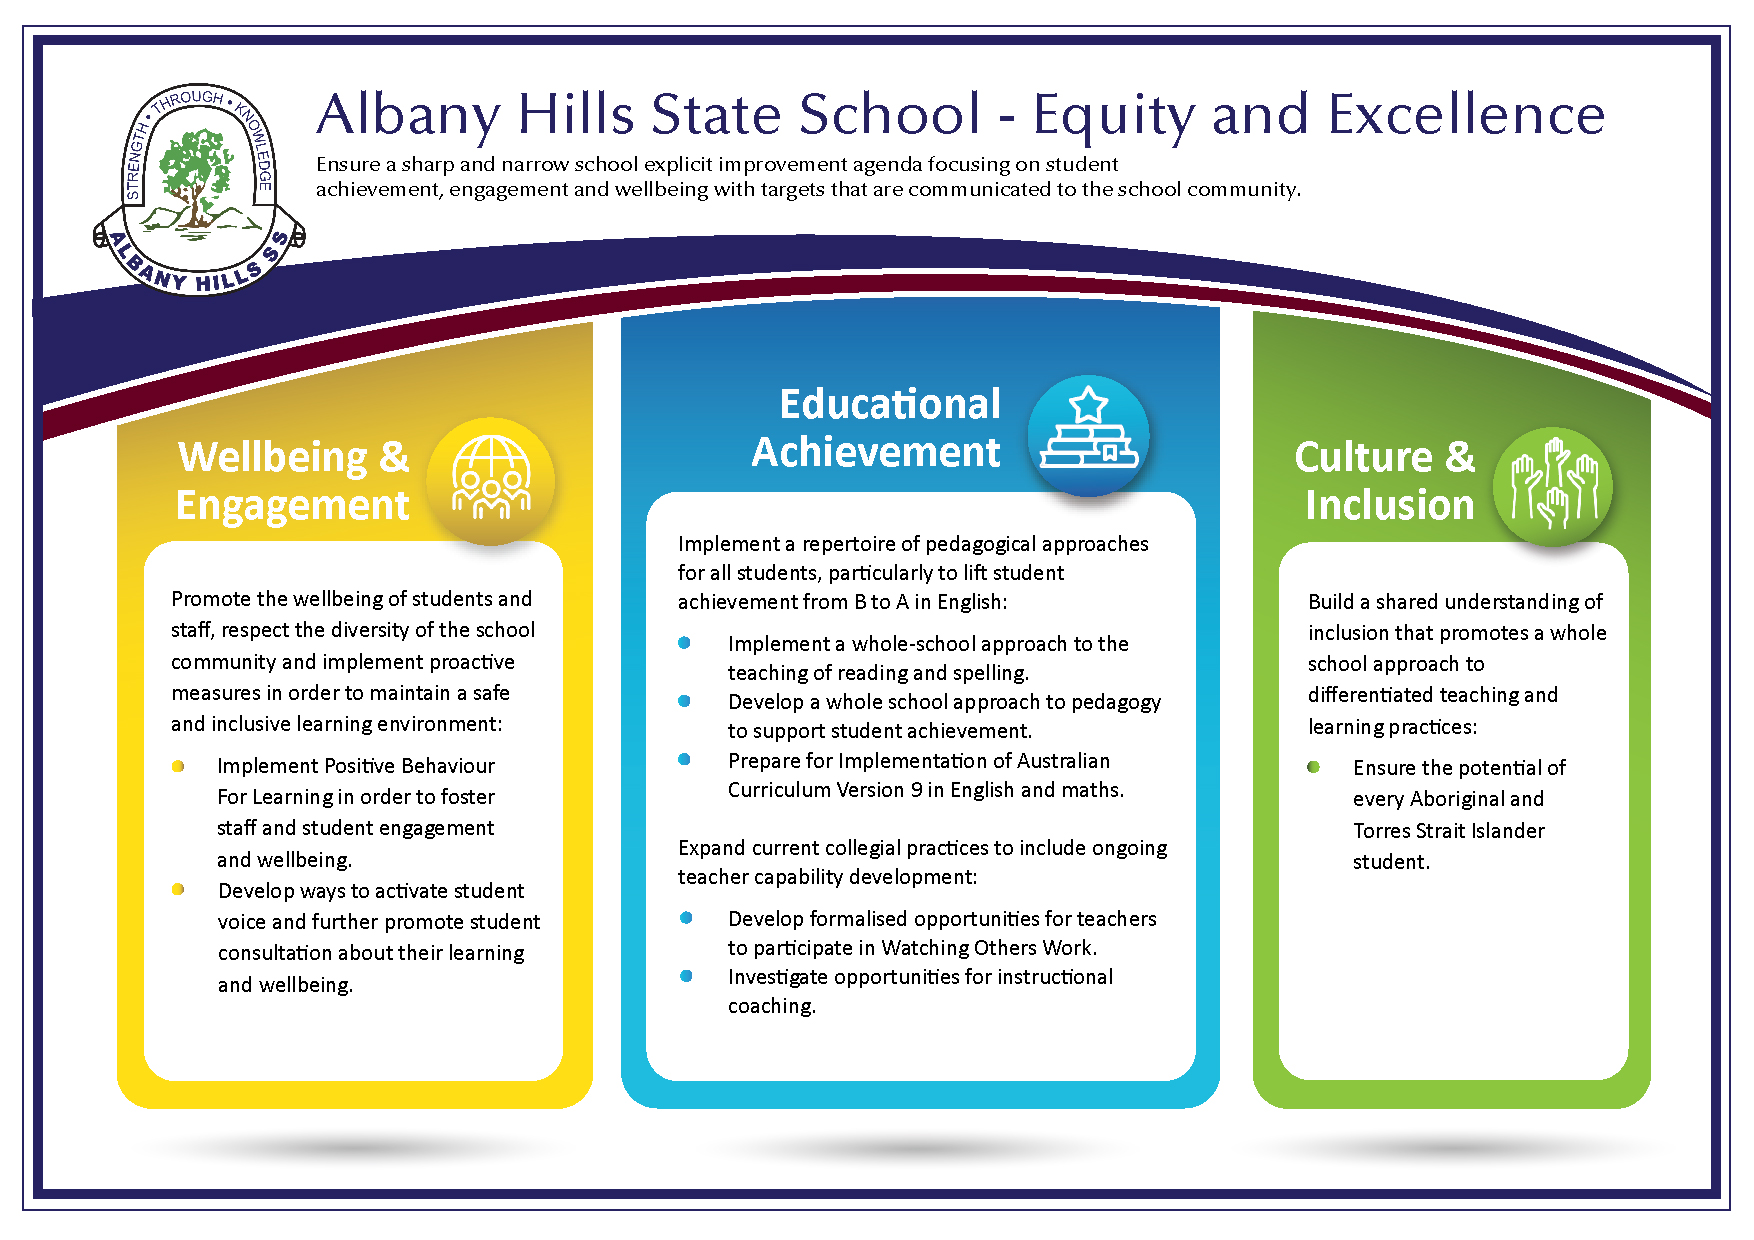 AI_2023_Equity and Excellence-05.jpg